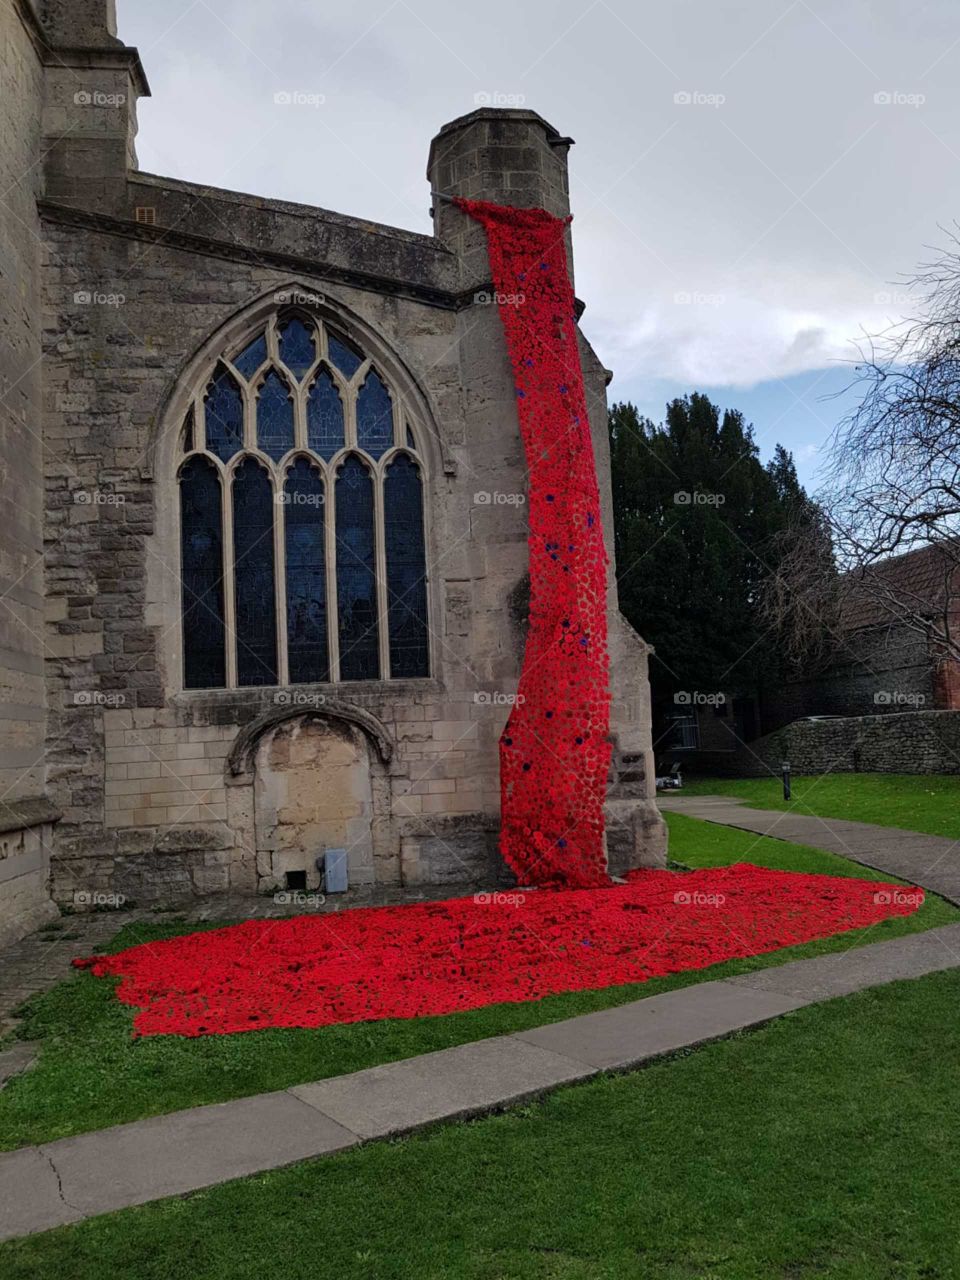 St John's church with a display of poppies for remembrance sunday